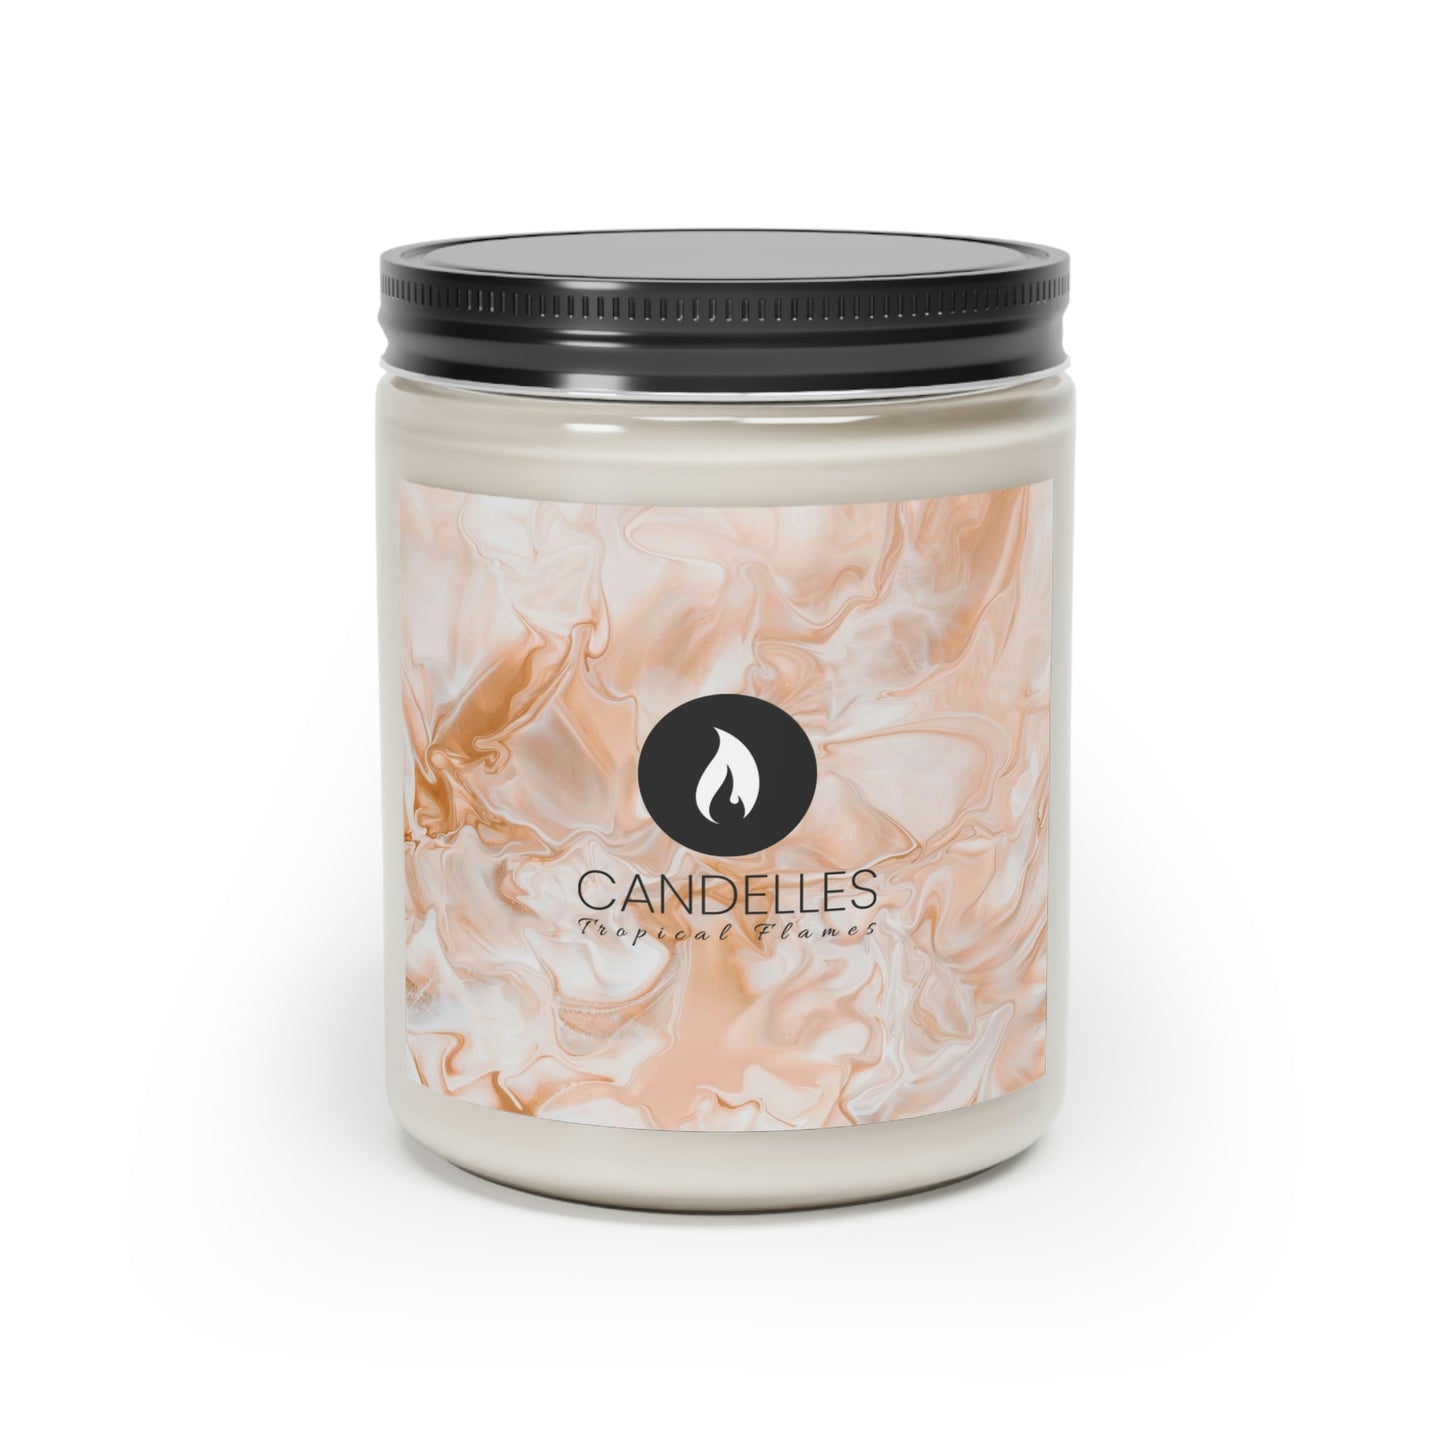 'Candelles Cinnamood' Scented Candle, 9oz